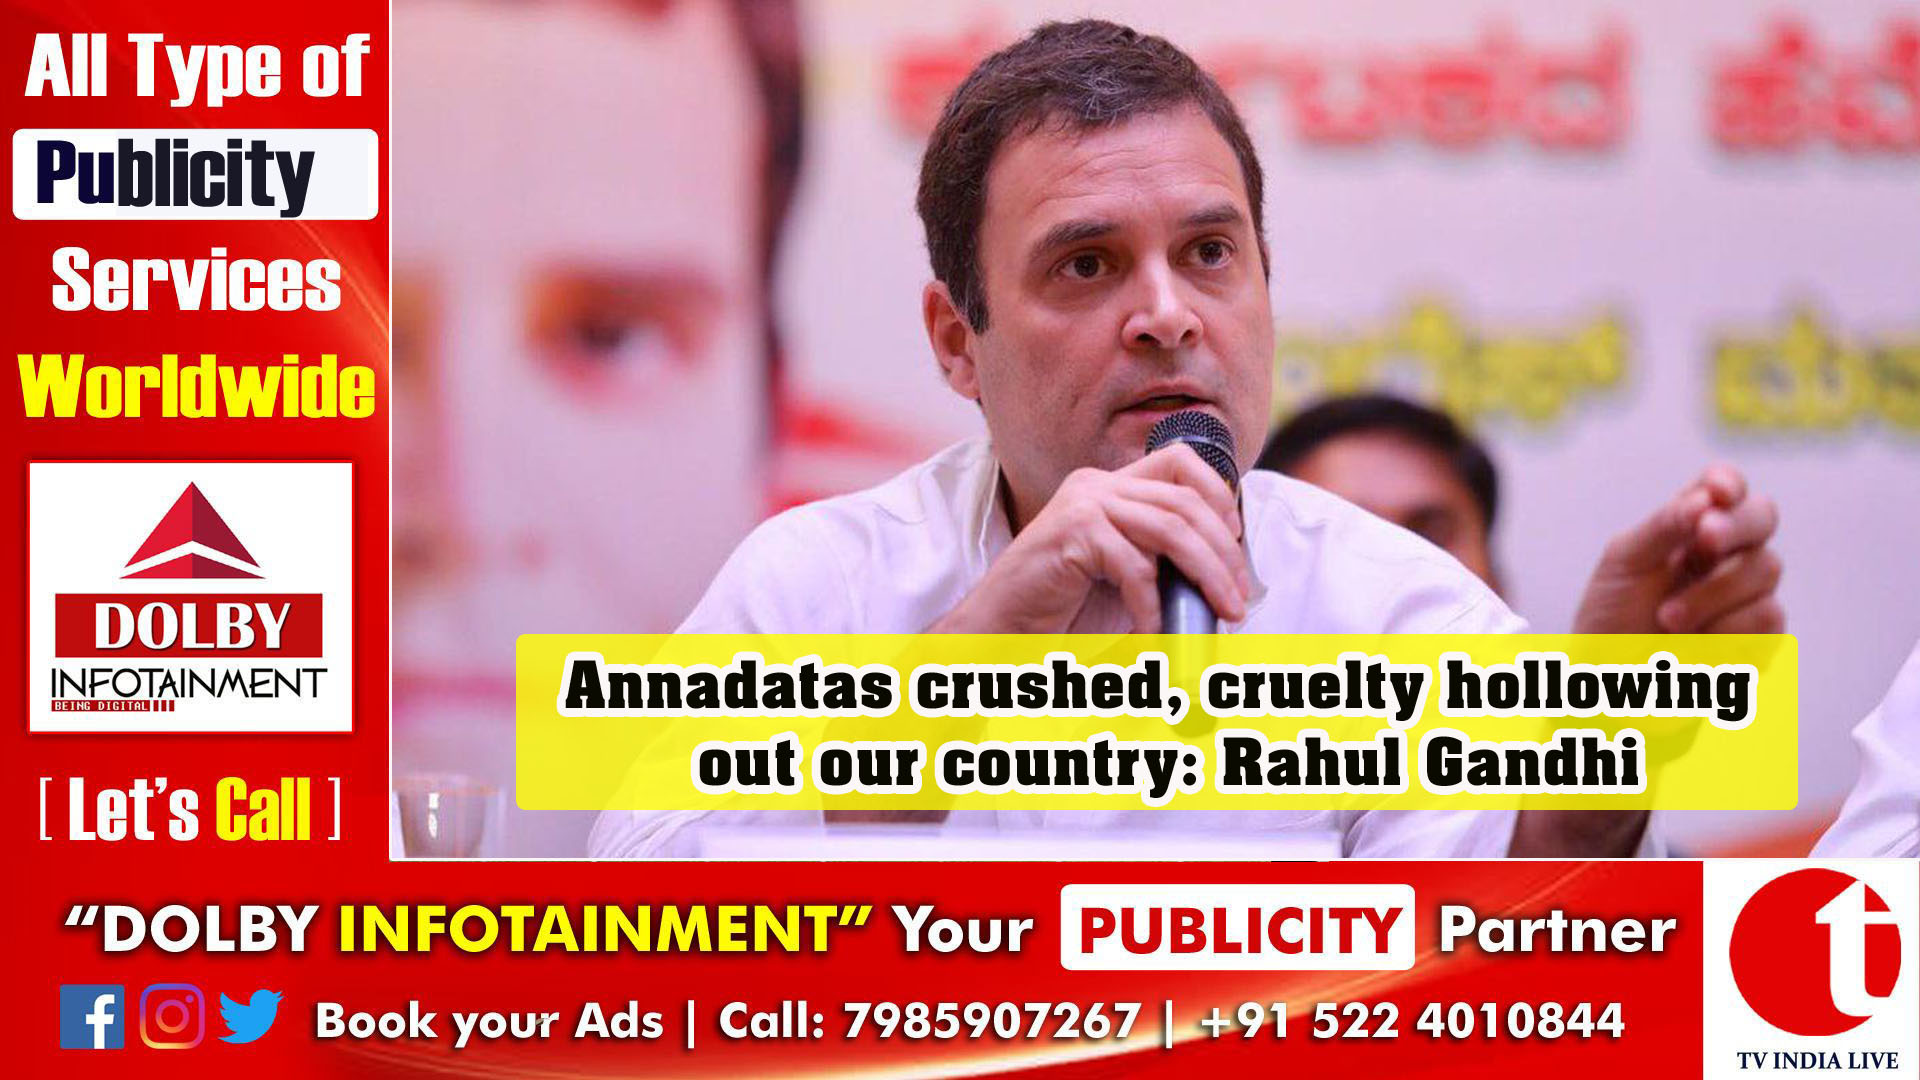 Annadatas crushed, cruelty hollowing out our country: Rahul Gandhi